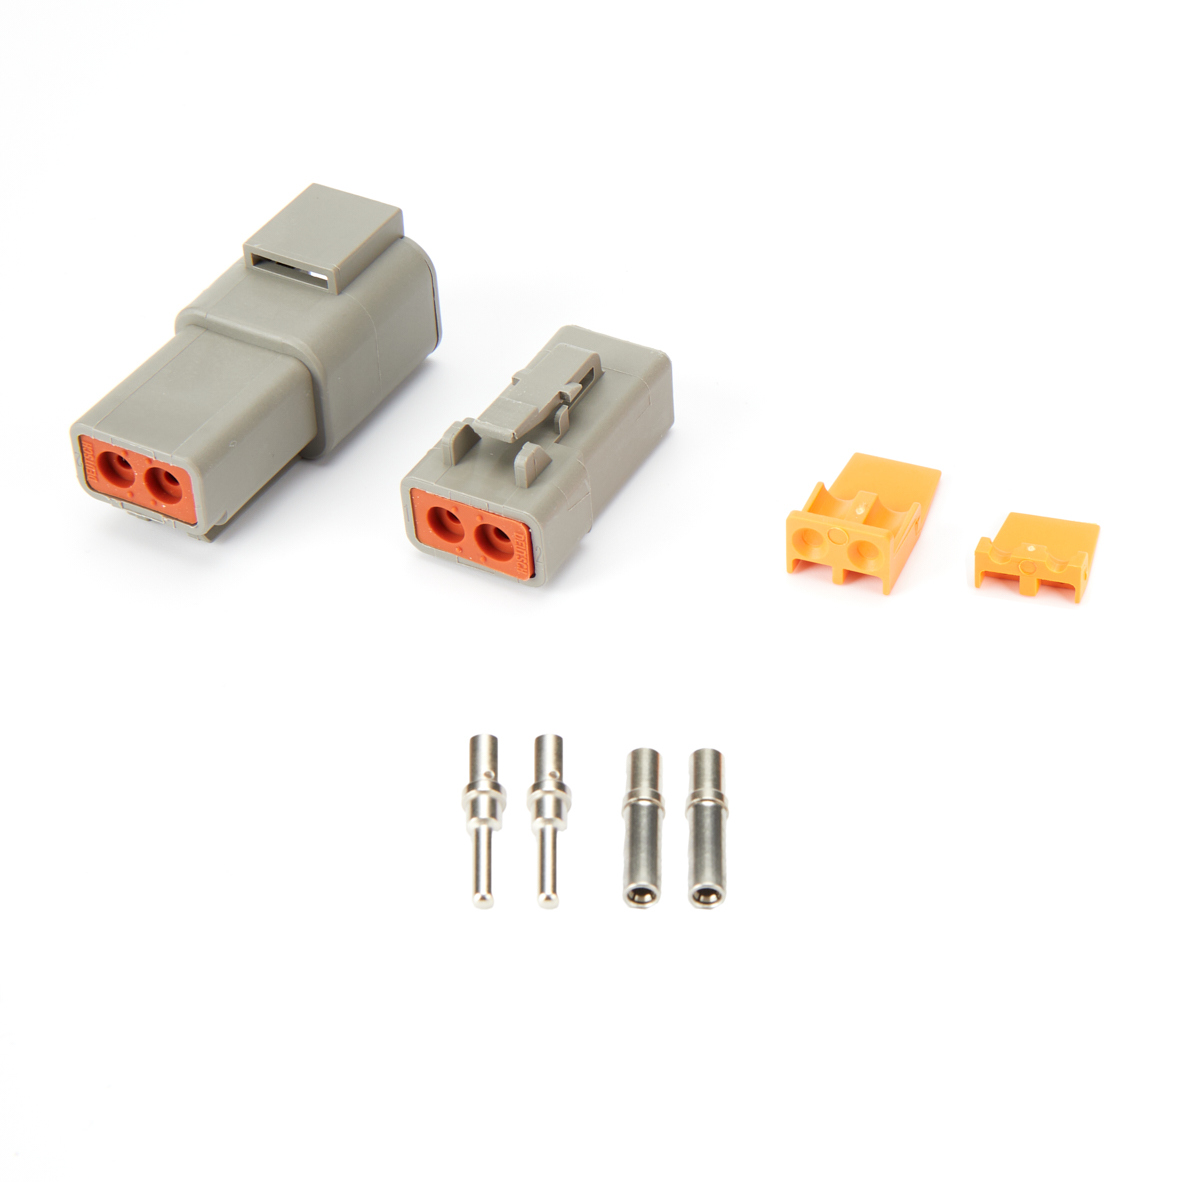 eGate 2 Way Motor Connection Kit - TS-0550-3131